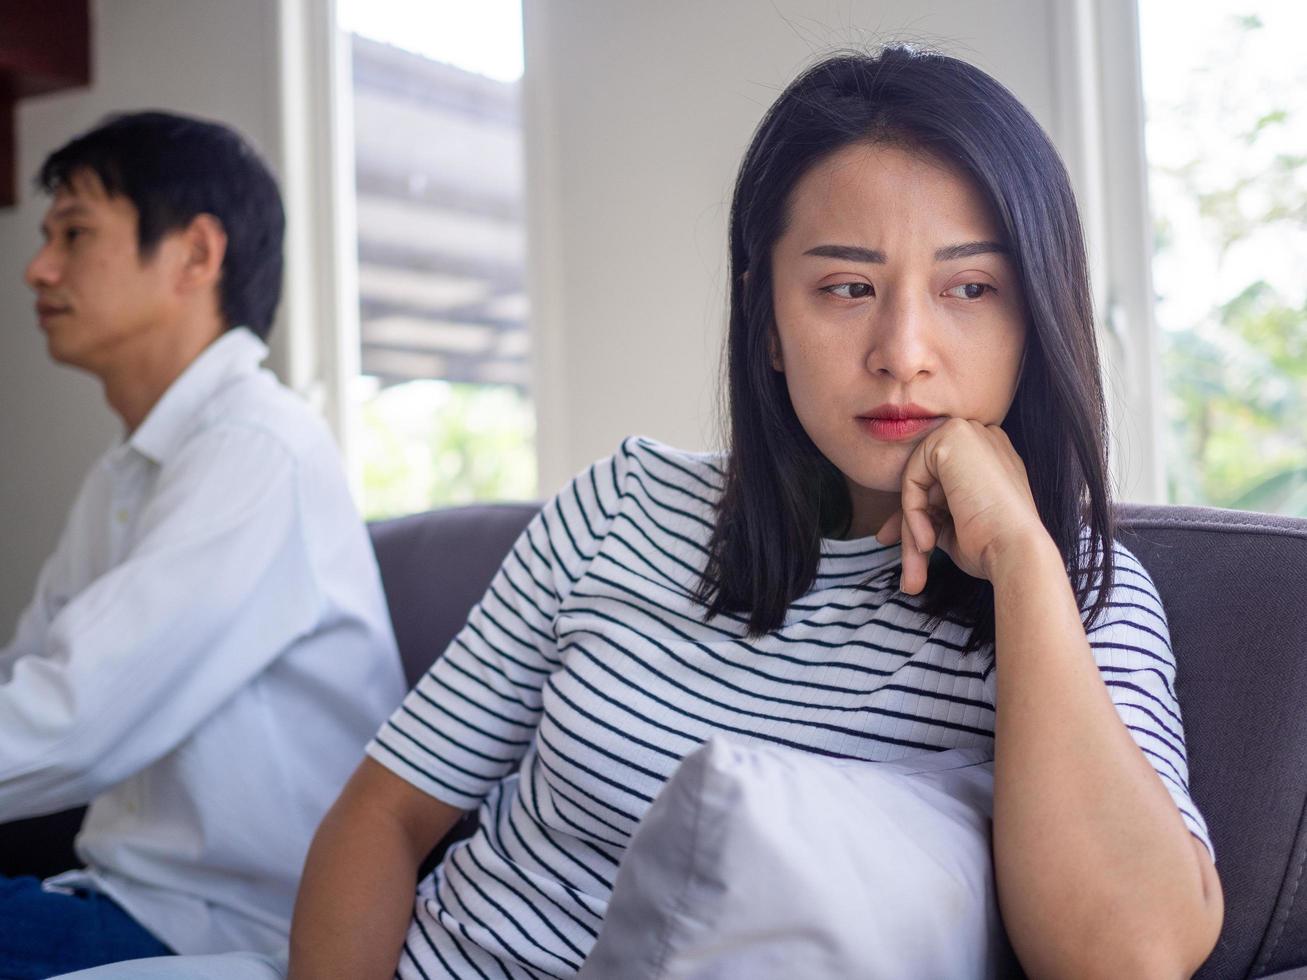 Asian women mourn and become irritated by their husband's behavior. After an argument and causing pain in the heart. Angry and not understanding each other, resulting to divorce photo